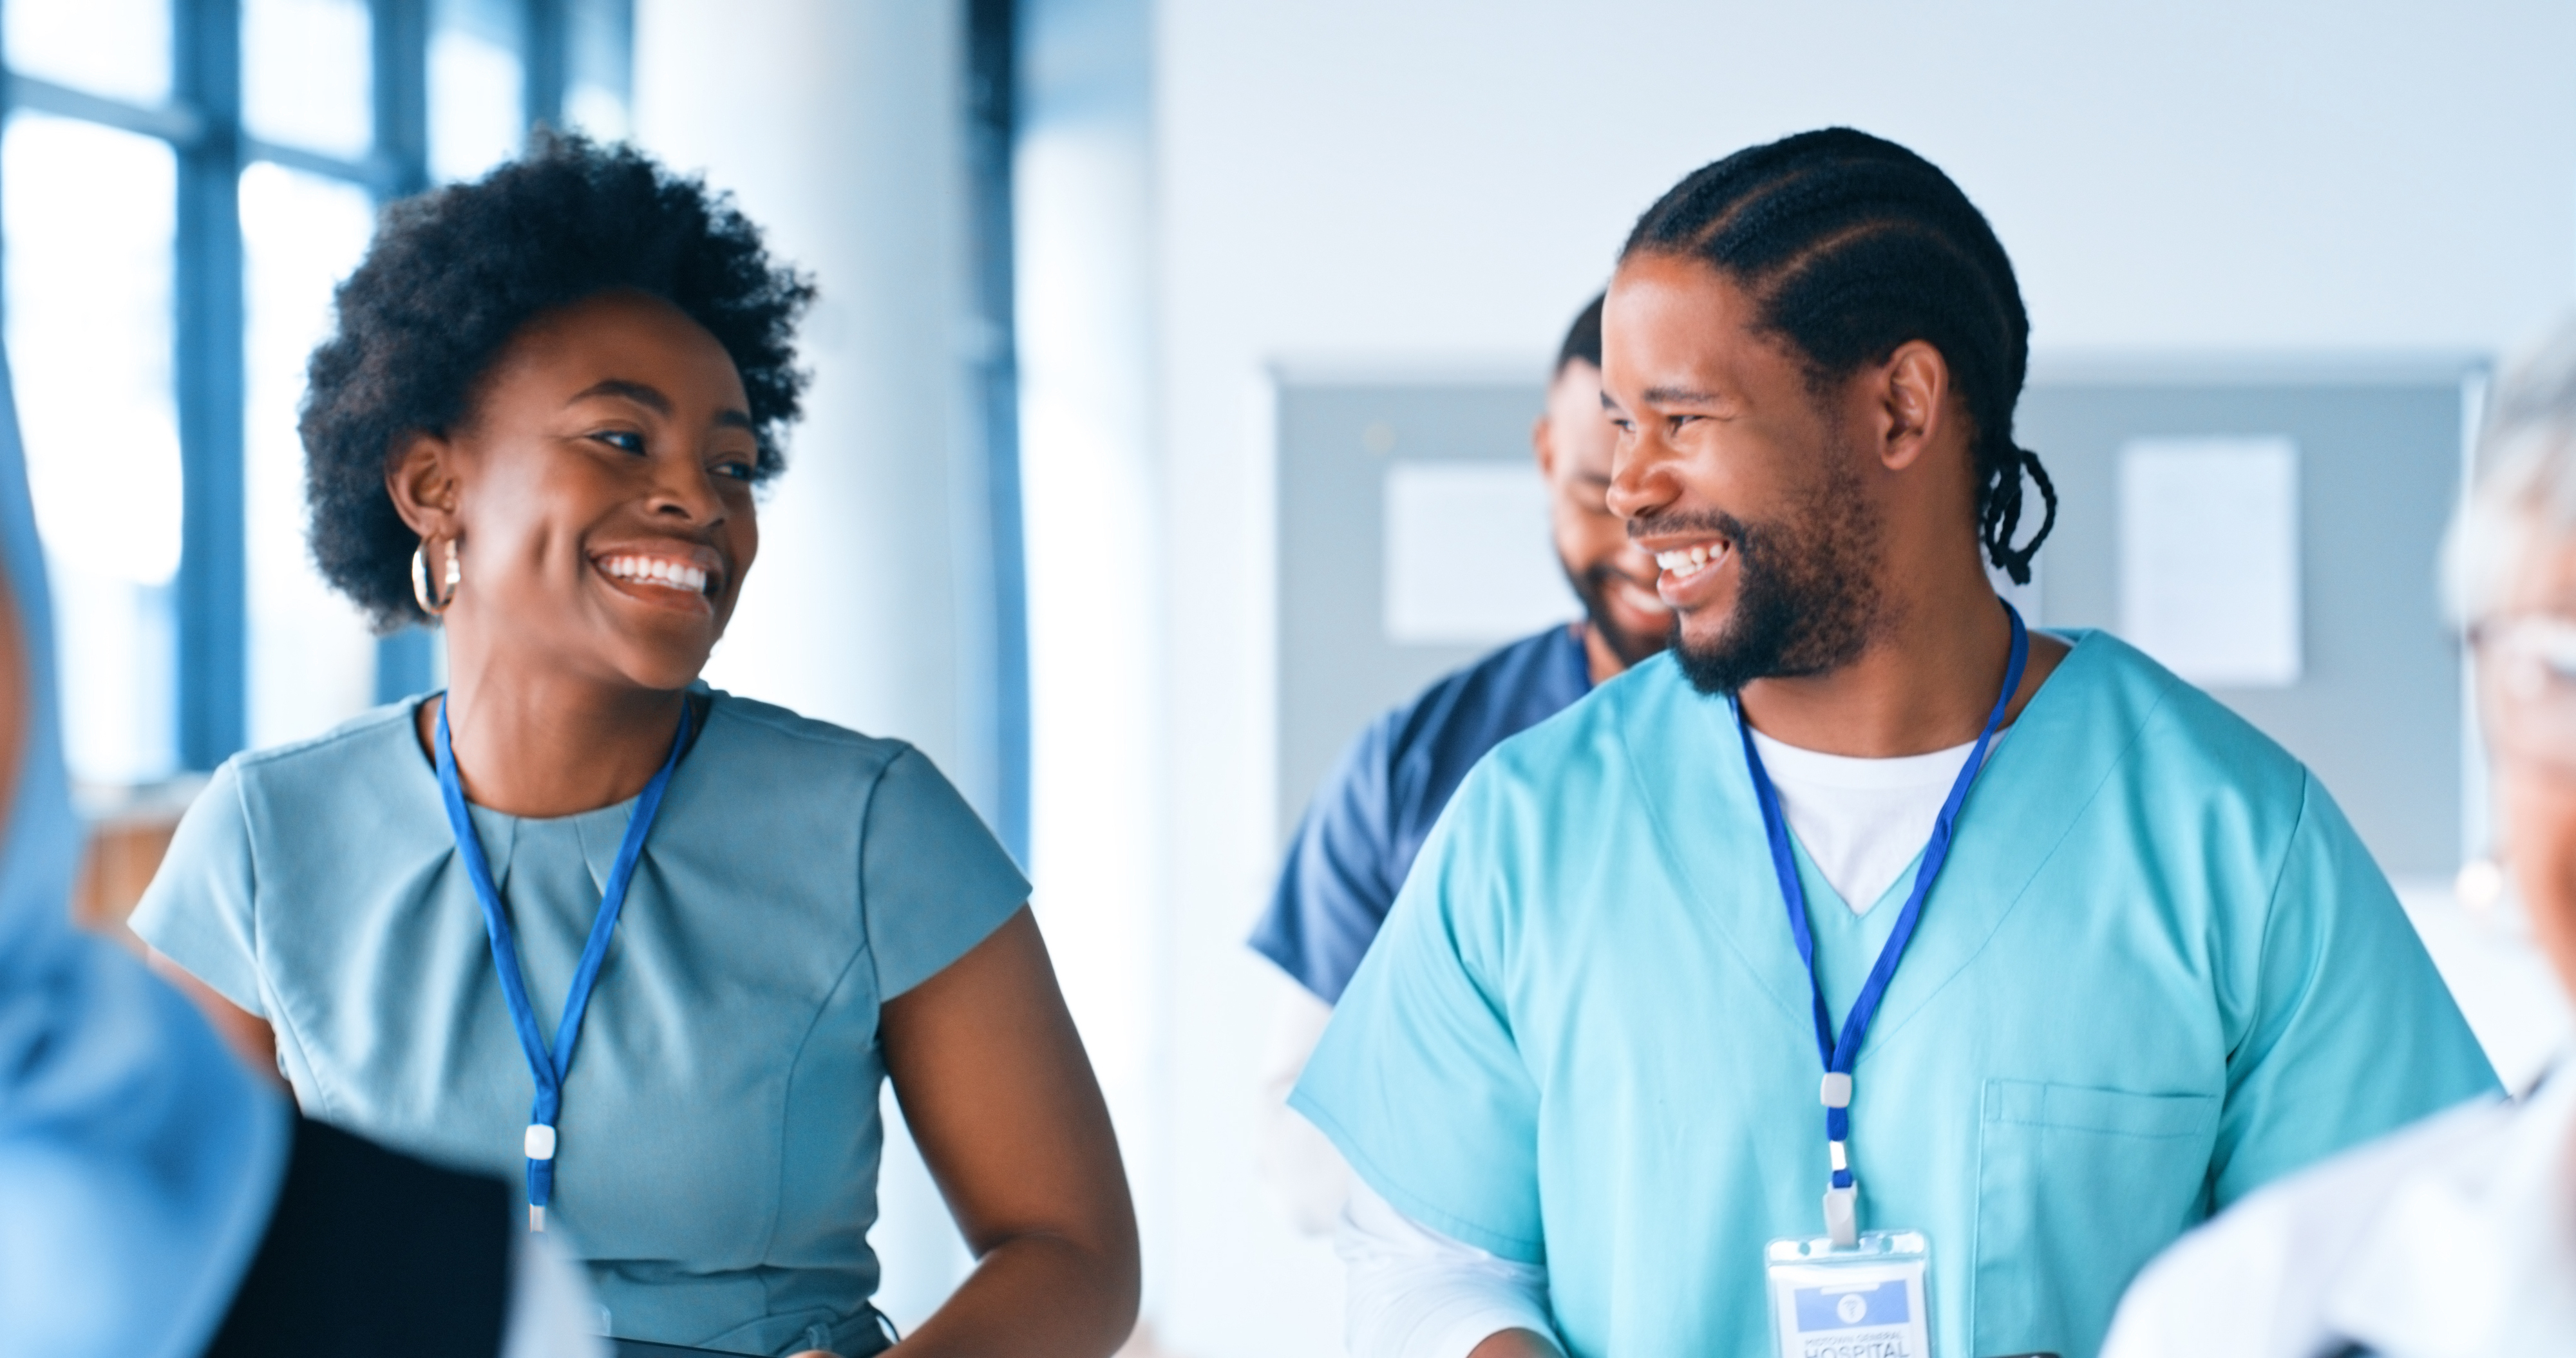 Two healthcare professionals in scrubs engaging in a cheerful conversation at the workplace